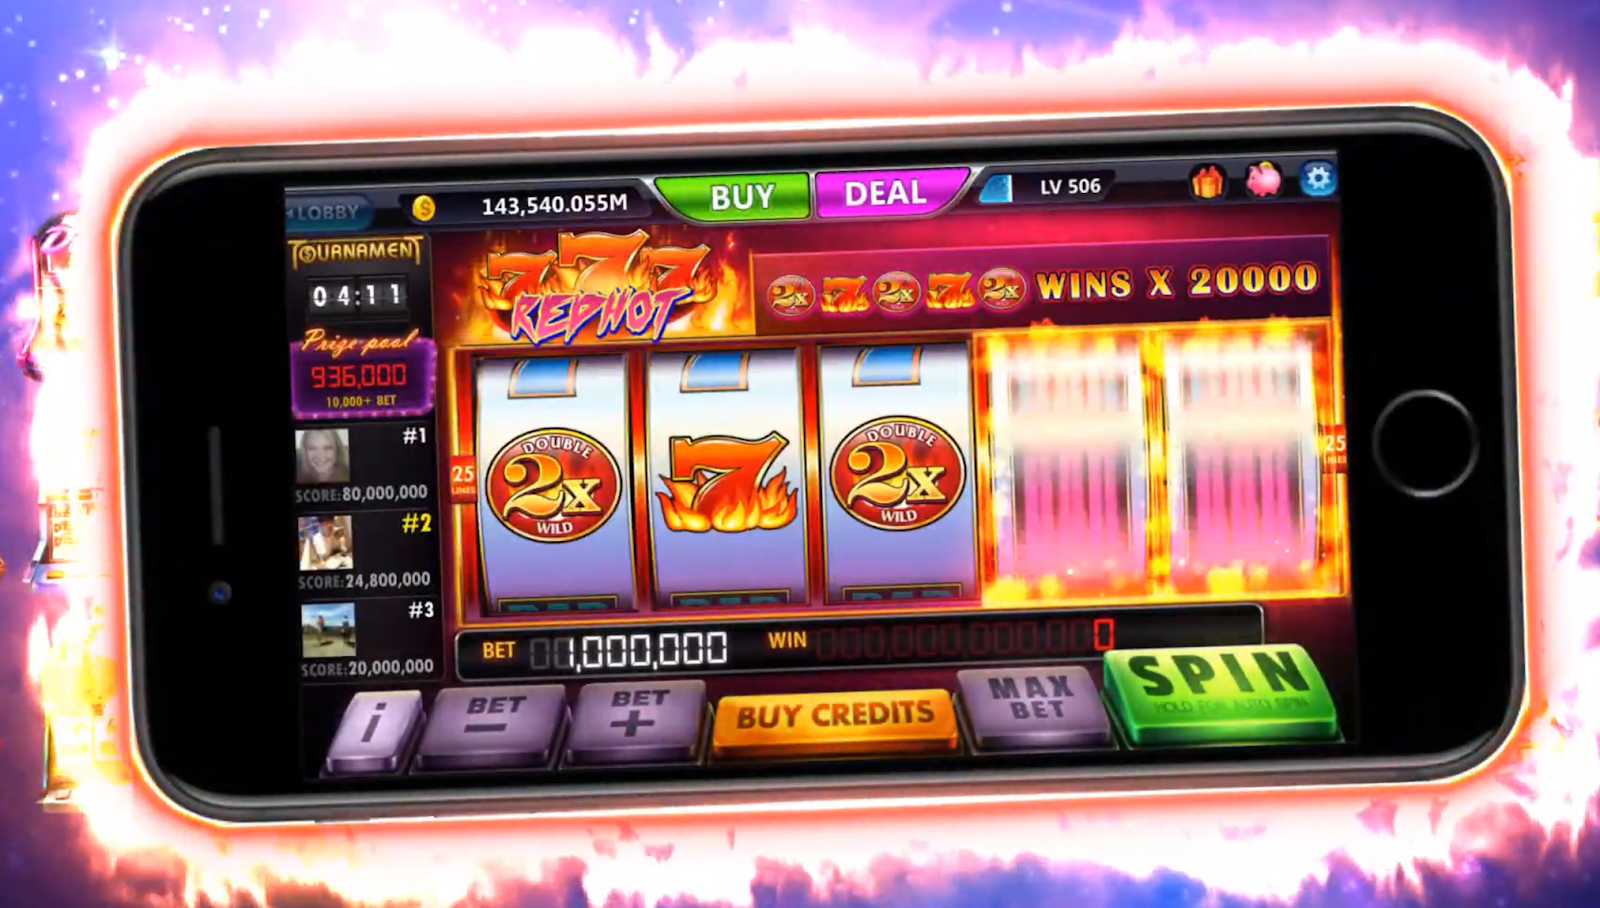 Slots With Mobile Payment Gambling